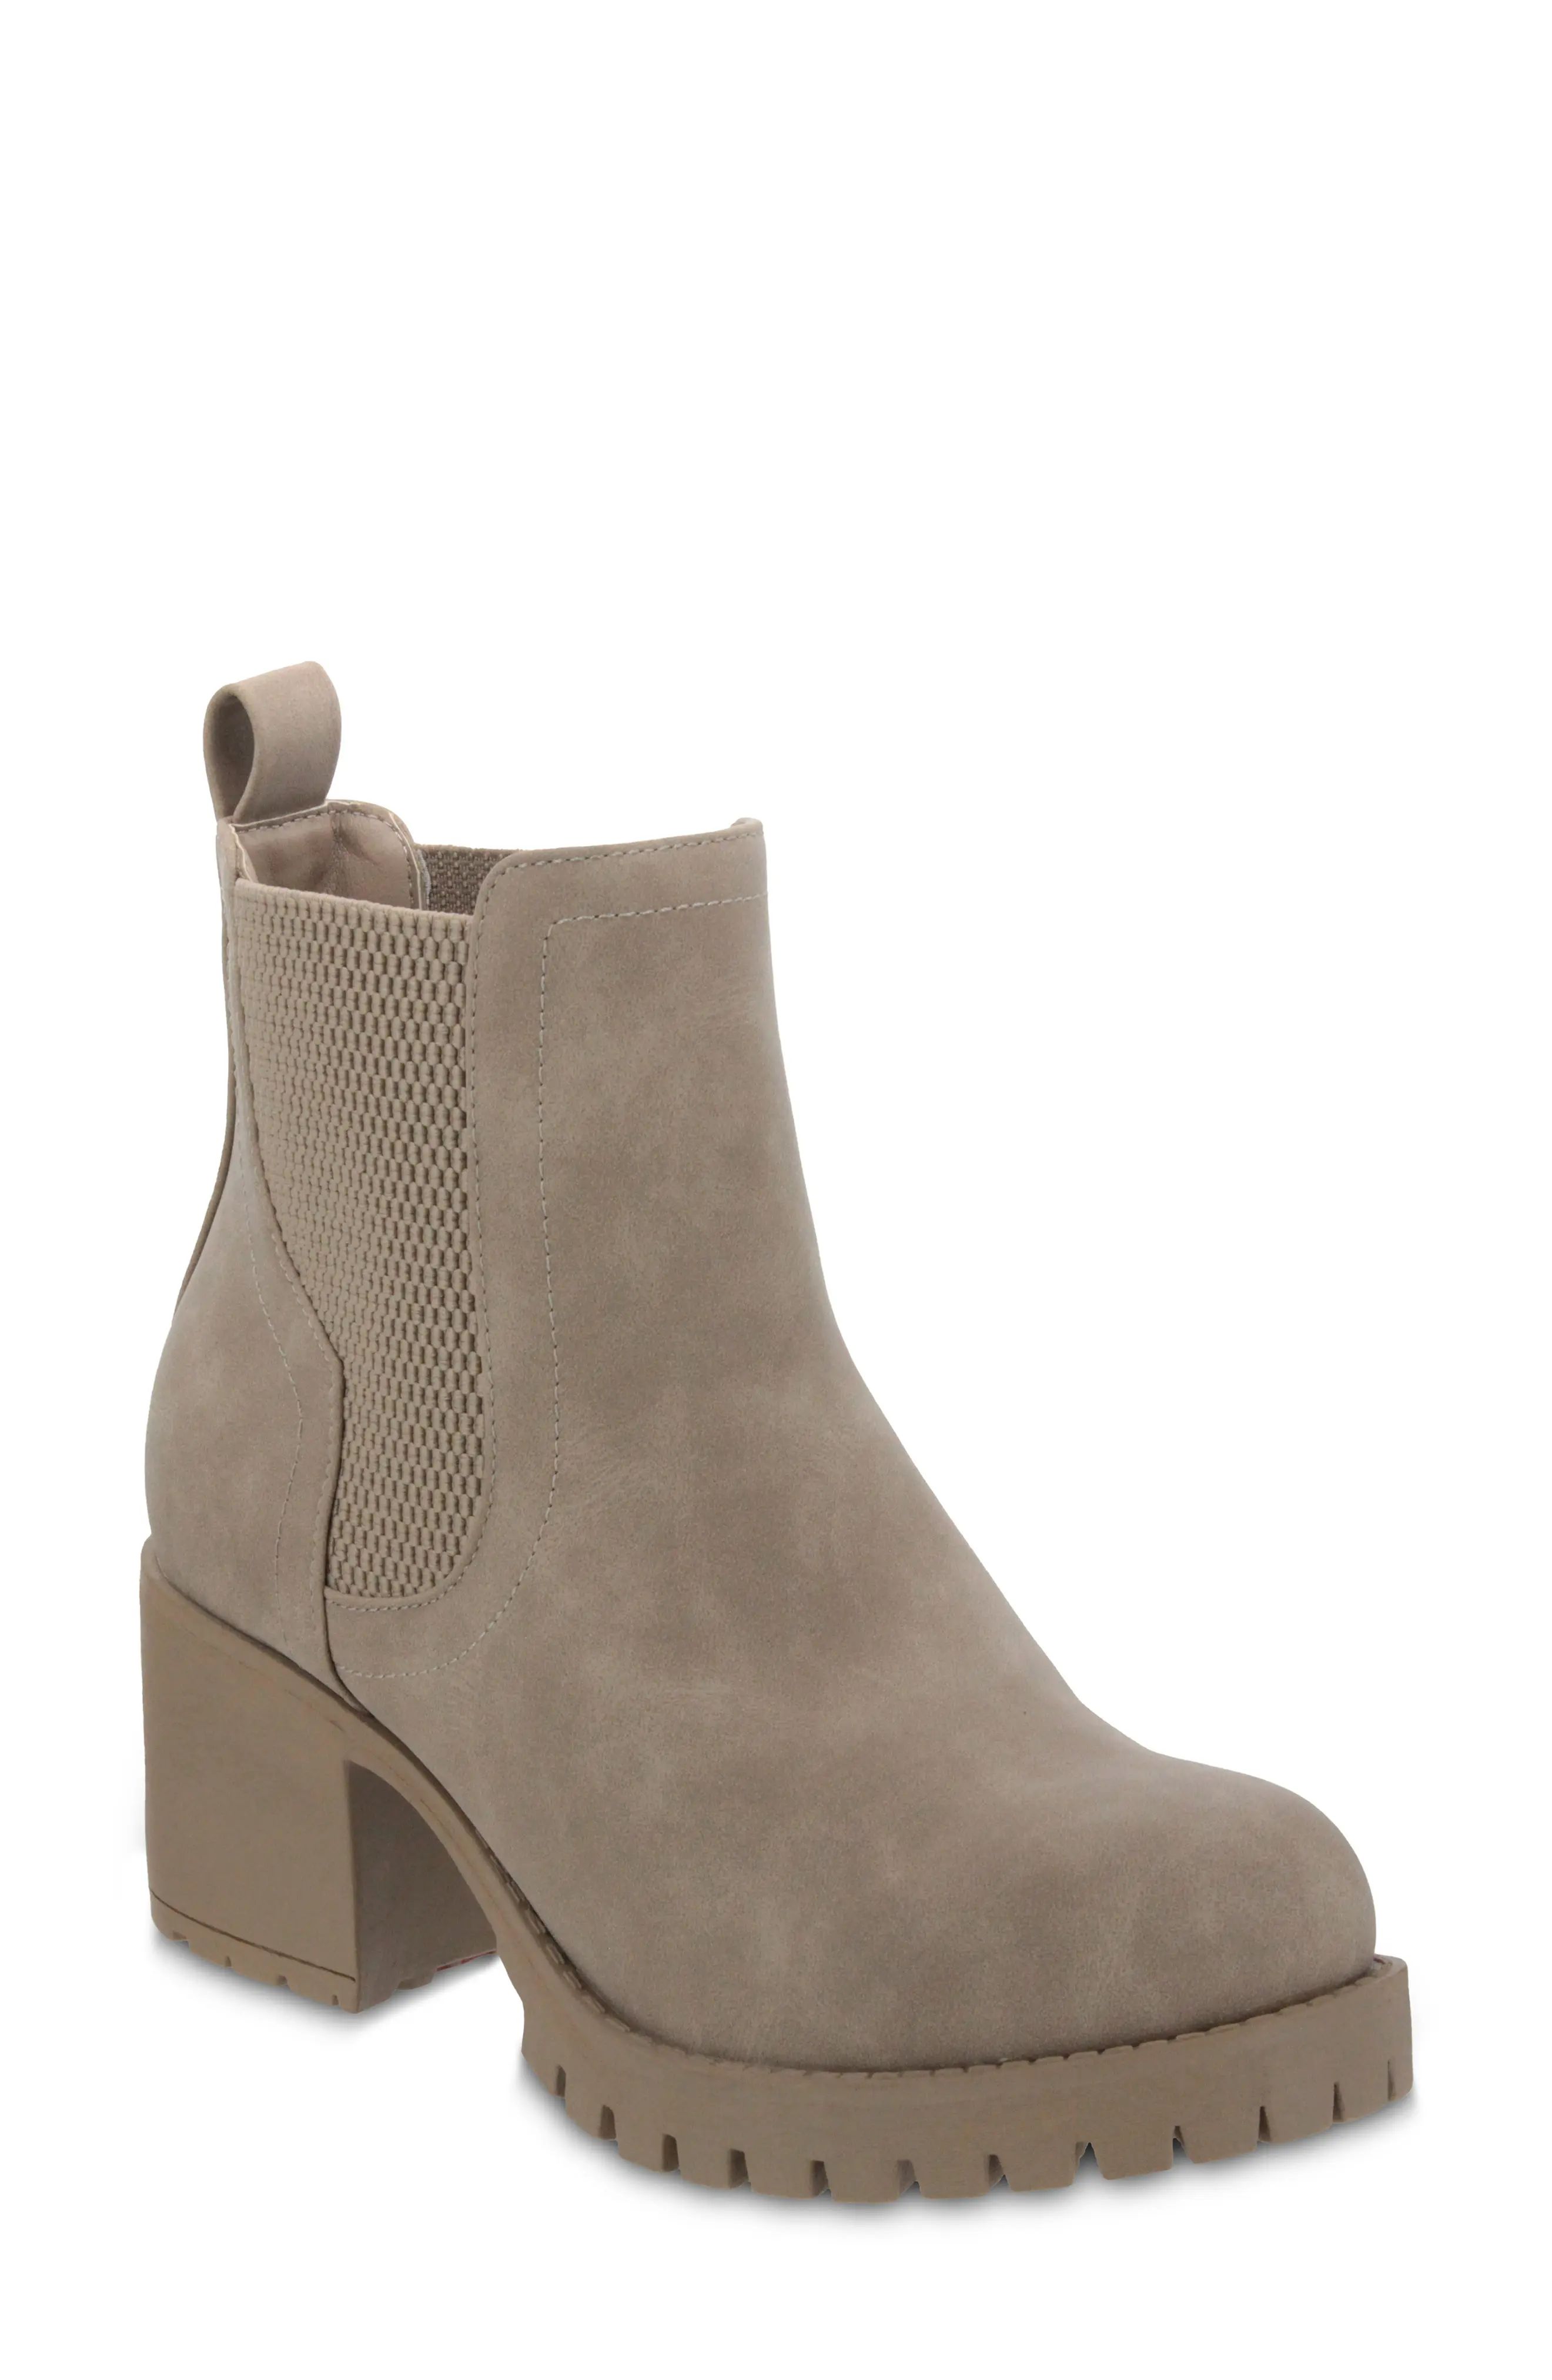 MIA Jonna Lug Sole Chelsea Boot in Sahara at Nordstrom, Size 8 | Nordstrom